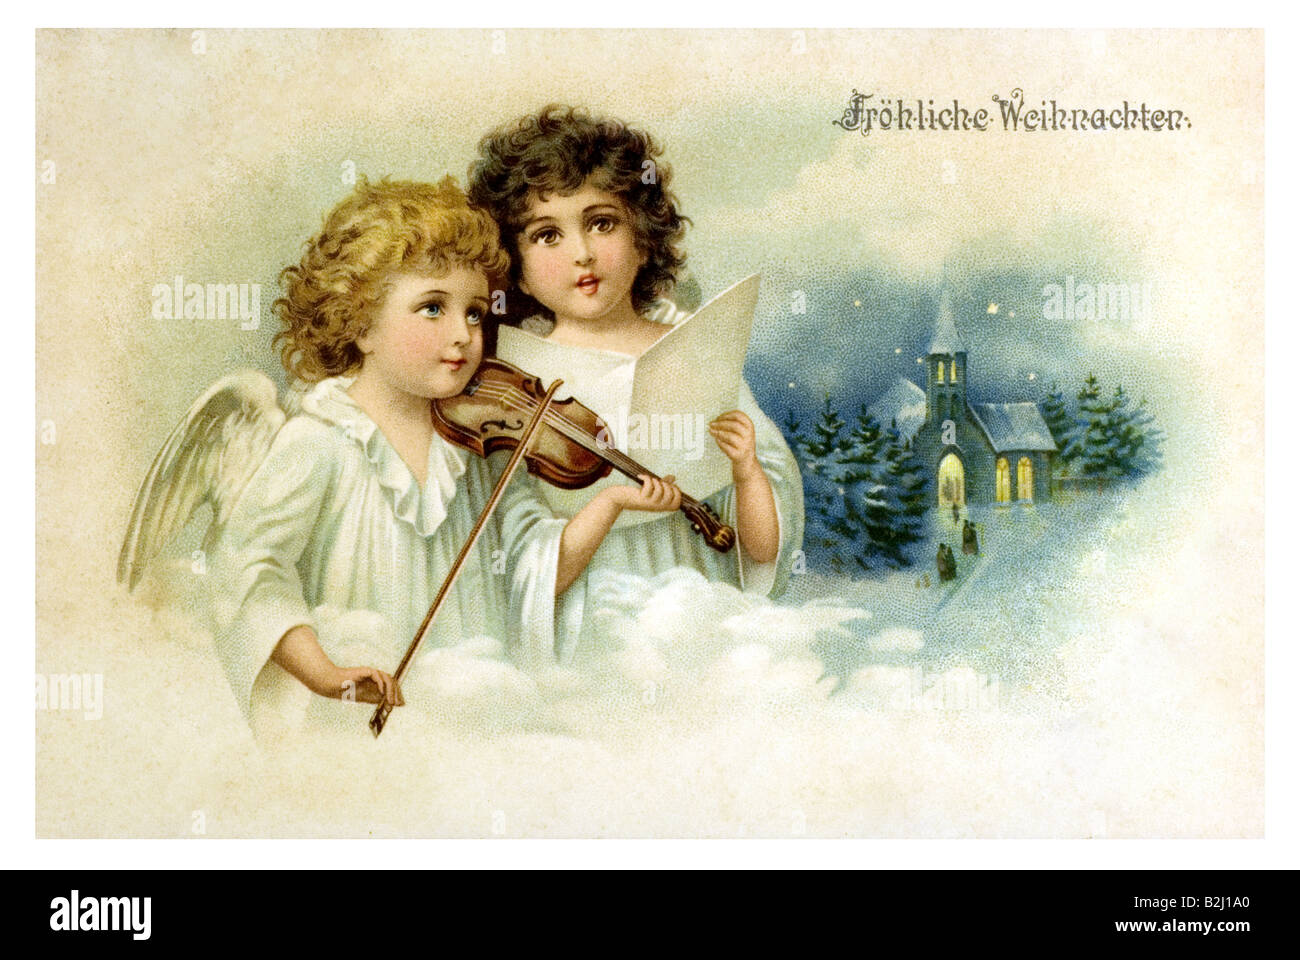 Postcard motive childen angel in heaven making music for the world 19th century Germany Stock Photo